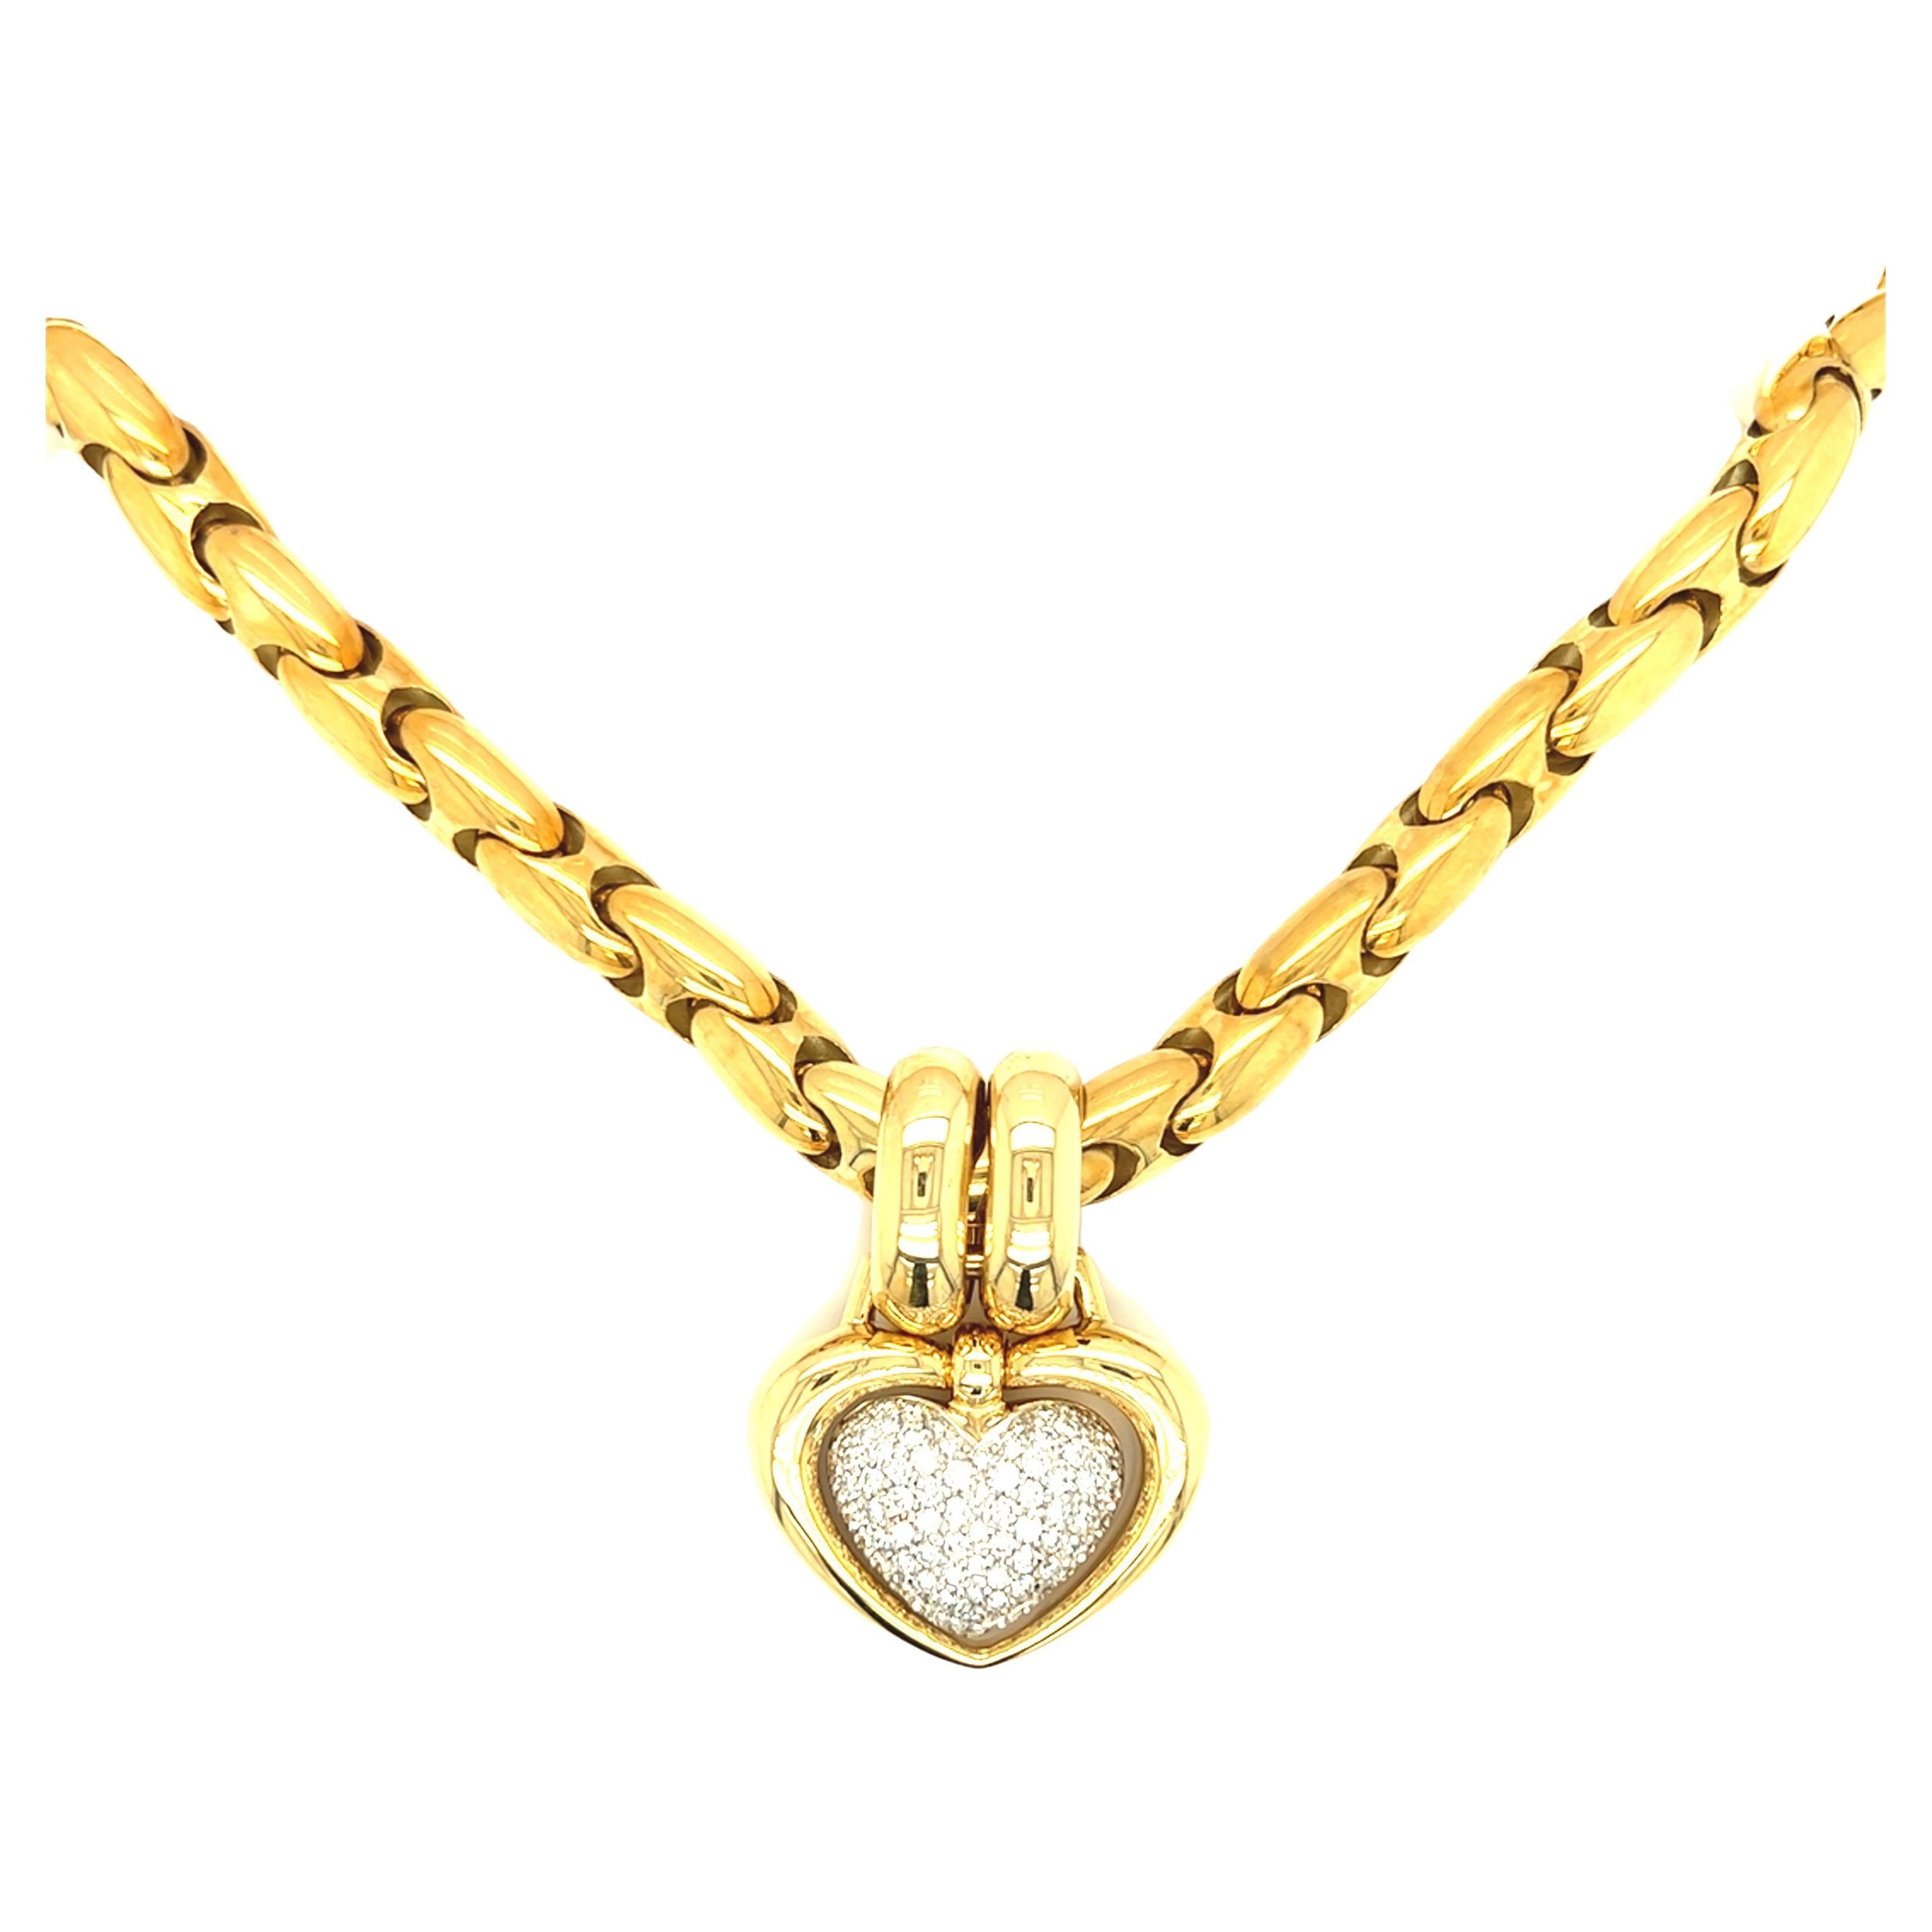 Chimento Heart Pendant Link Chain Necklace 18k Yellow Gold 82 grams